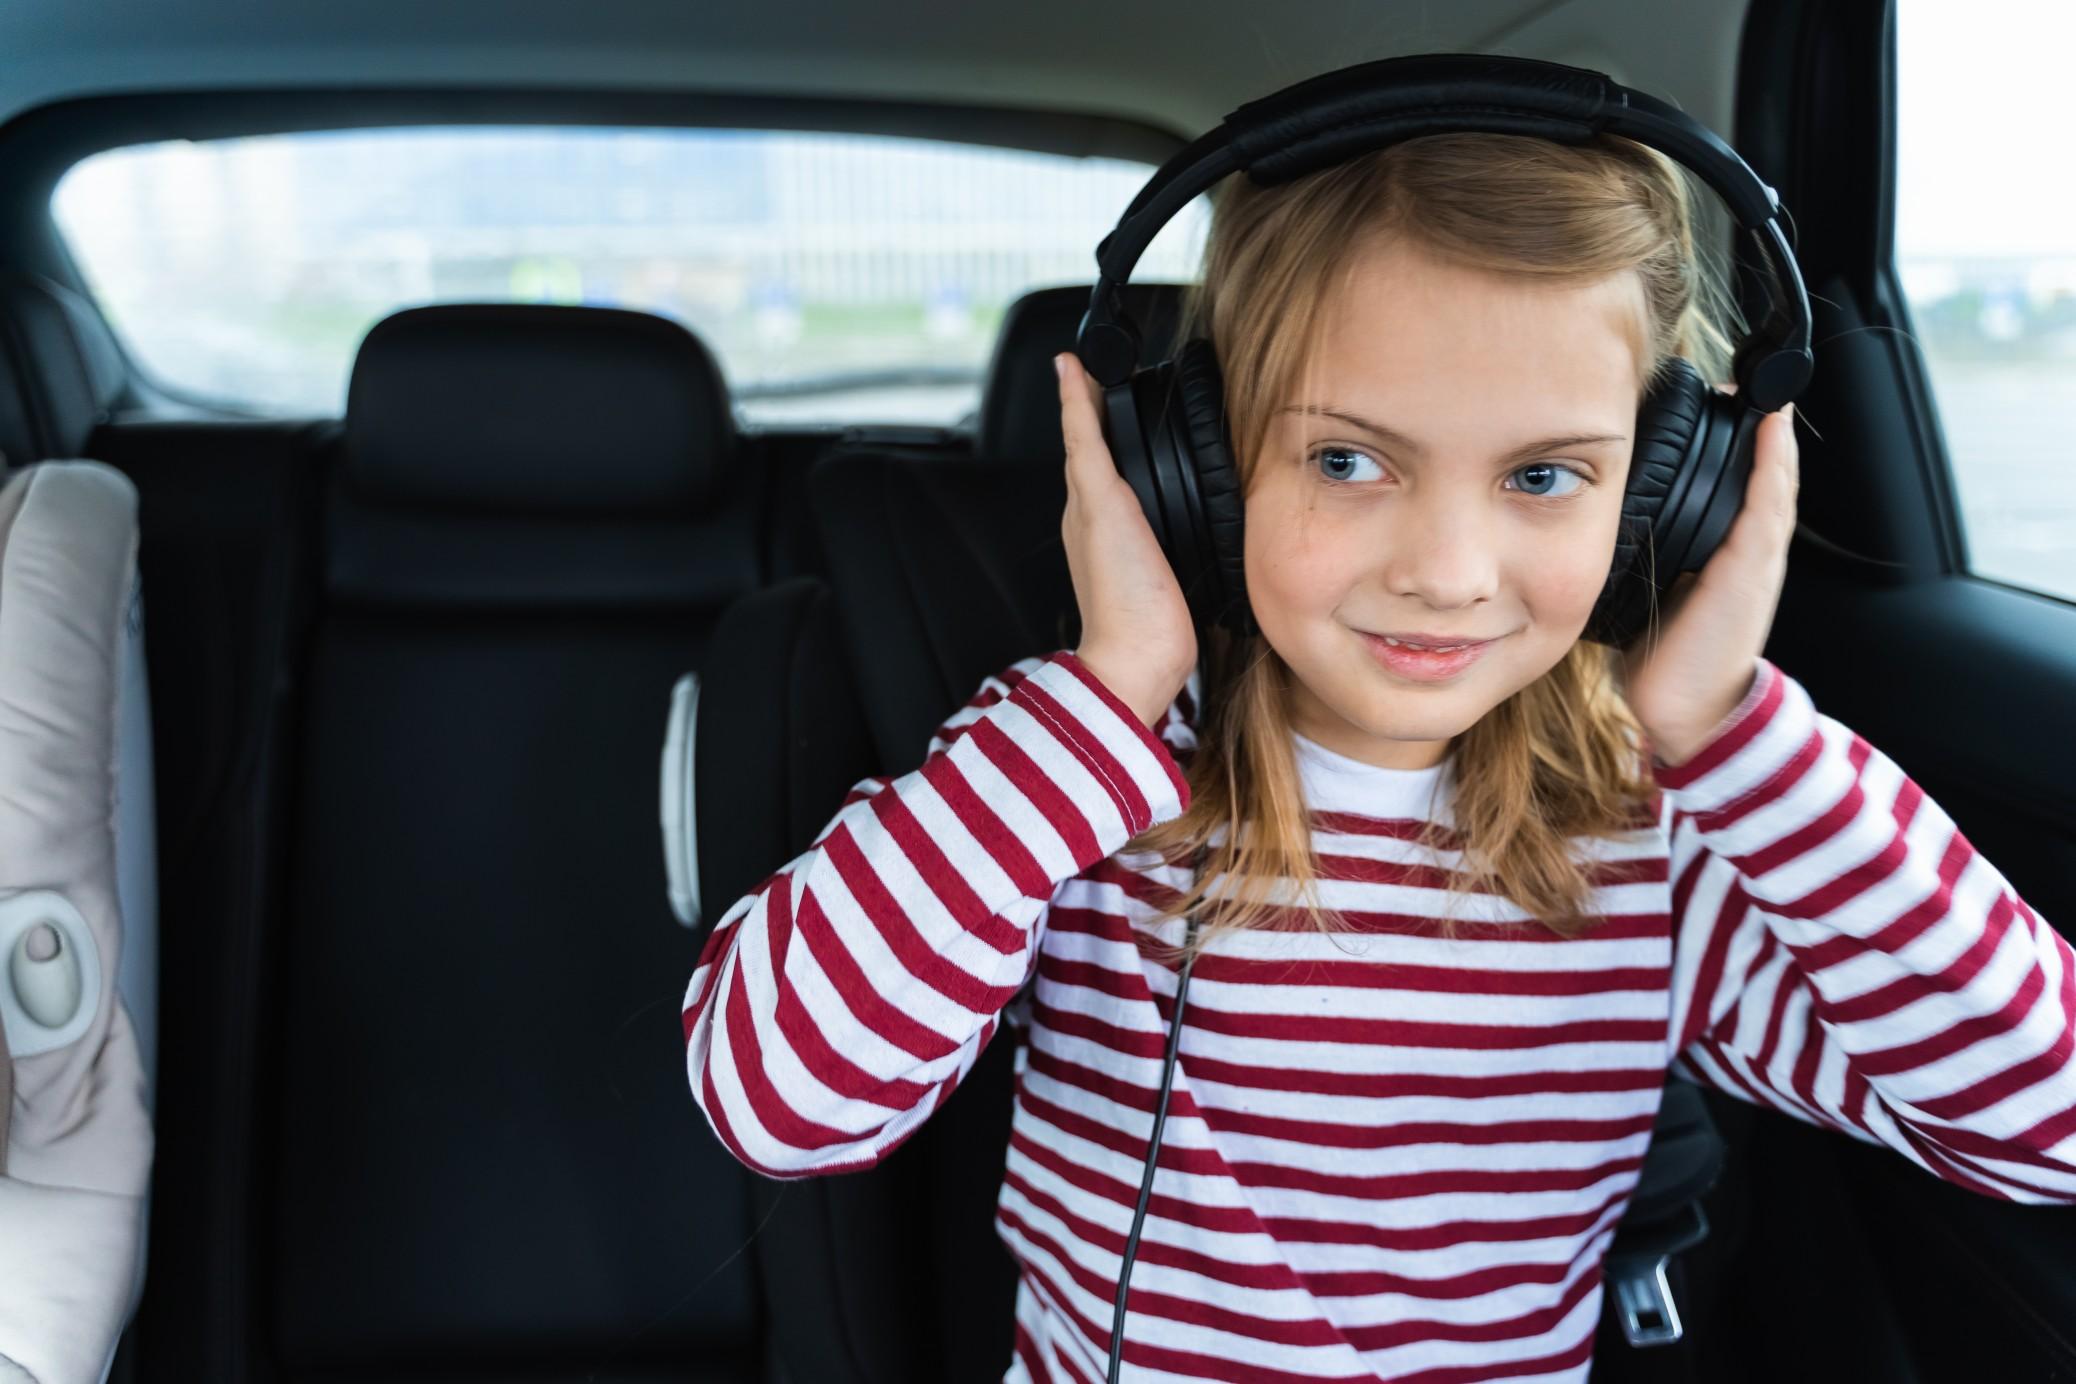 Cars and music are a match made in heaven.